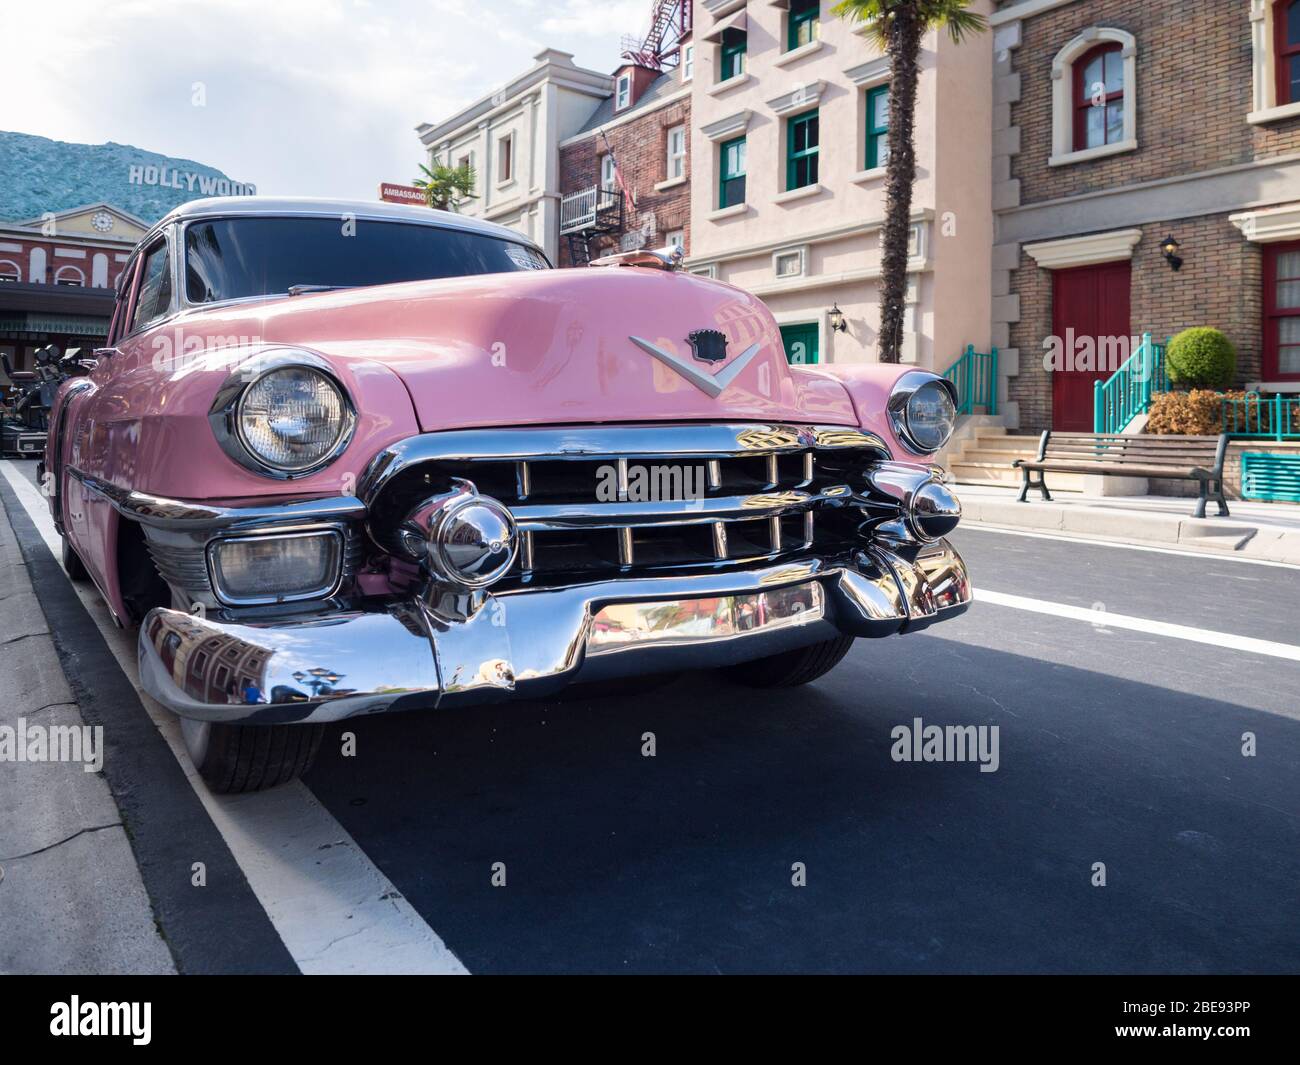 Verona, Italy - September 7, 2019: Vintage pink car parked along a street and in the background the word Hollywood. Stock Photo